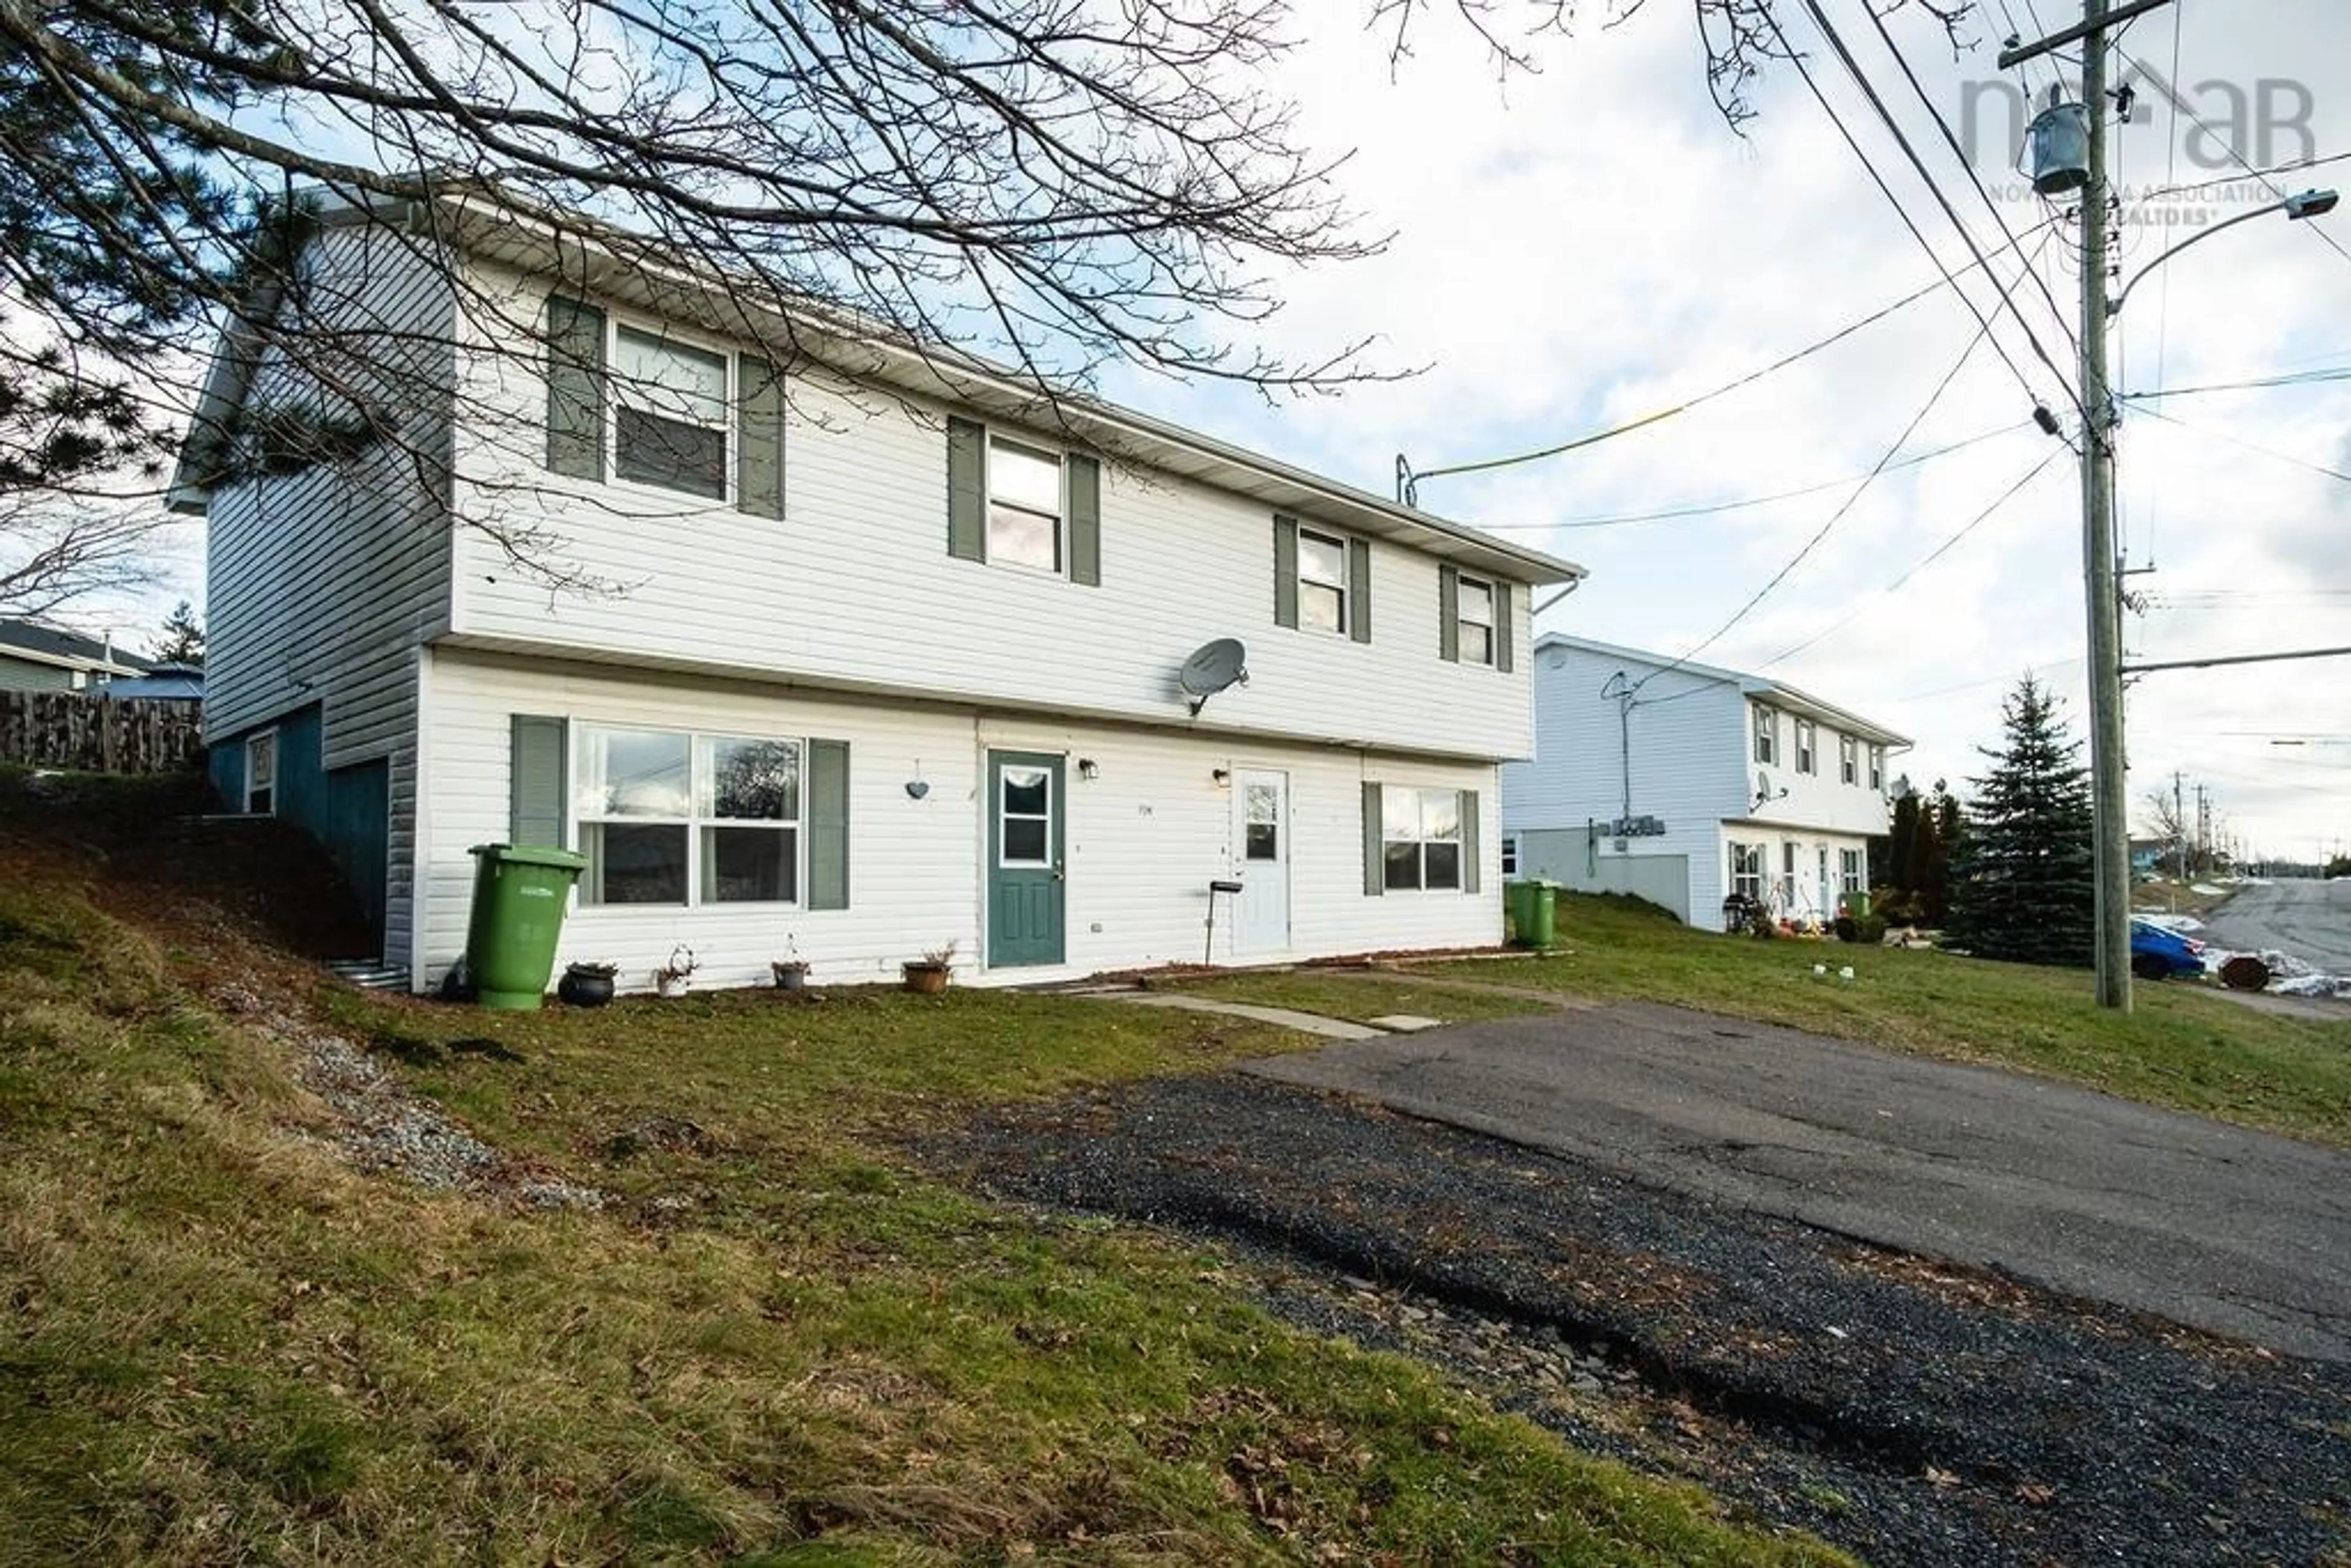 A pic from exterior of the house or condo for 704 Queen St, Port Hawkesbury Nova Scotia B9A 2W8